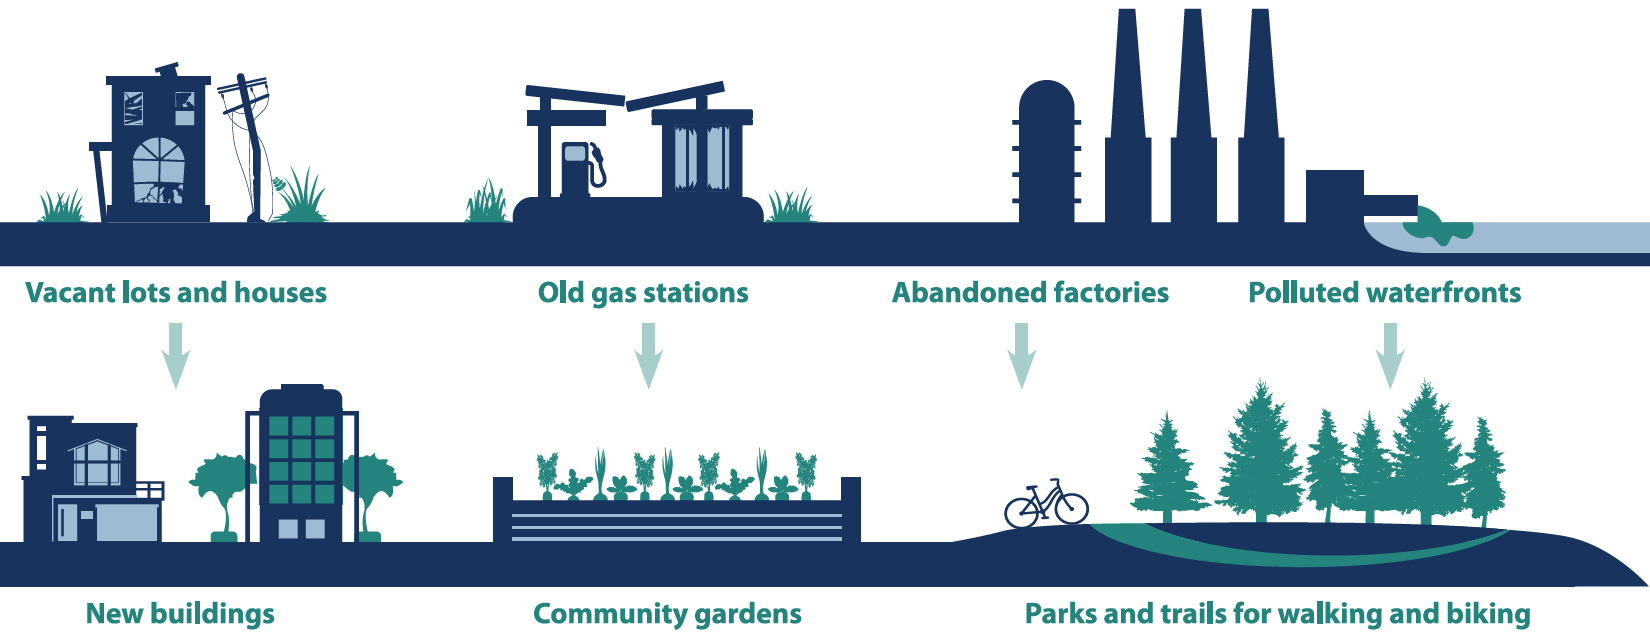 Illustration depicting land reuse sites being transformed into new developments.